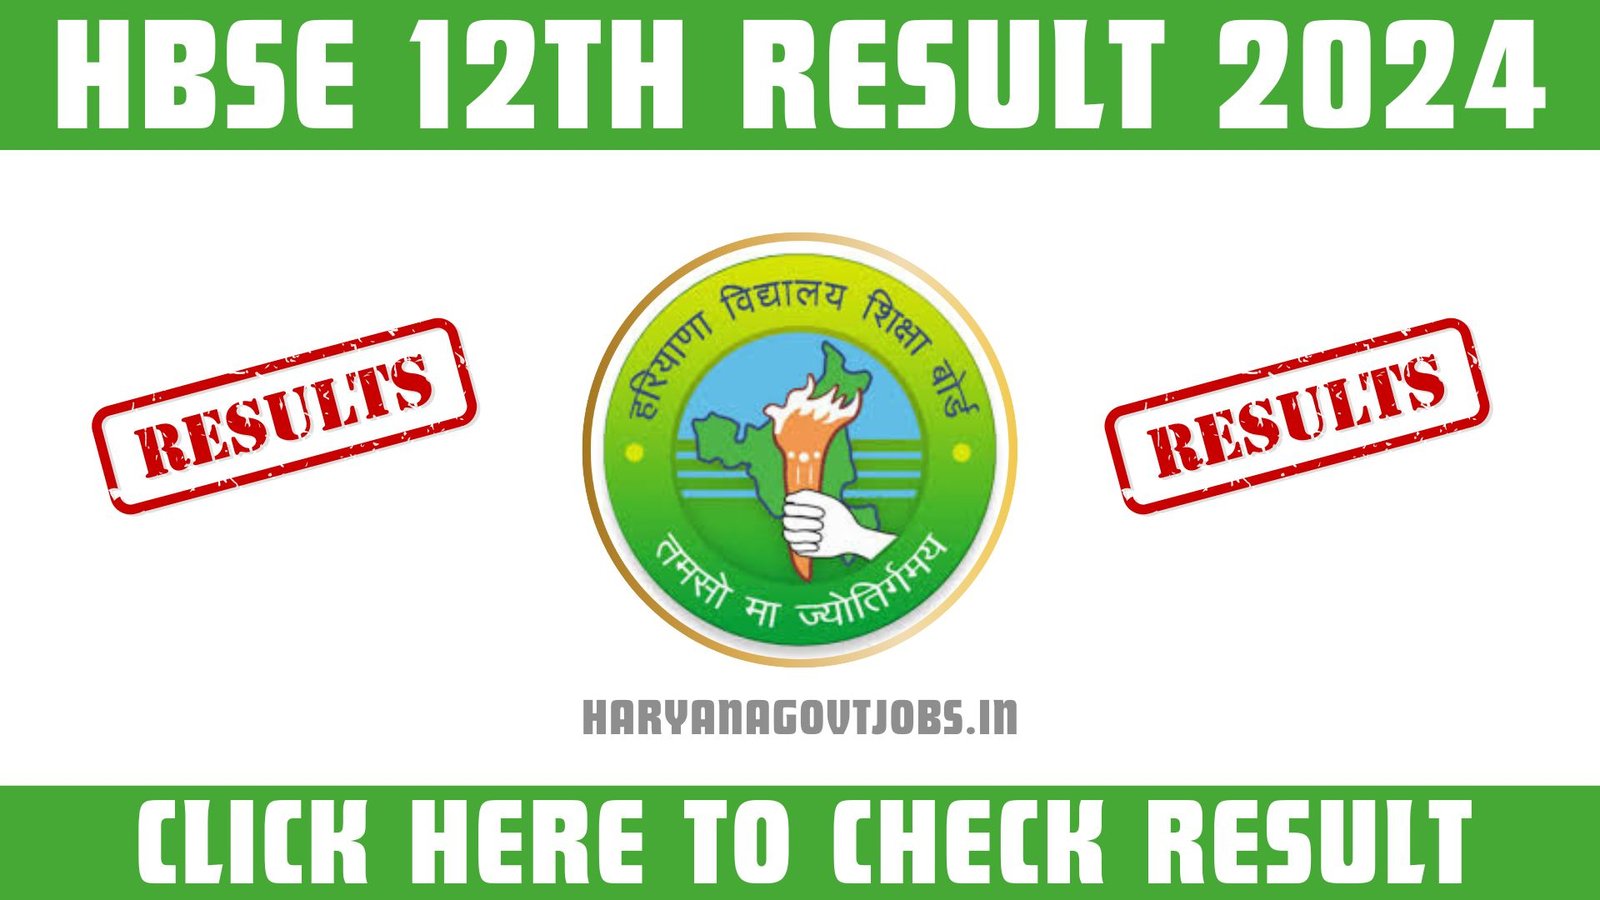 HBSE 12th Result 2024 Overview